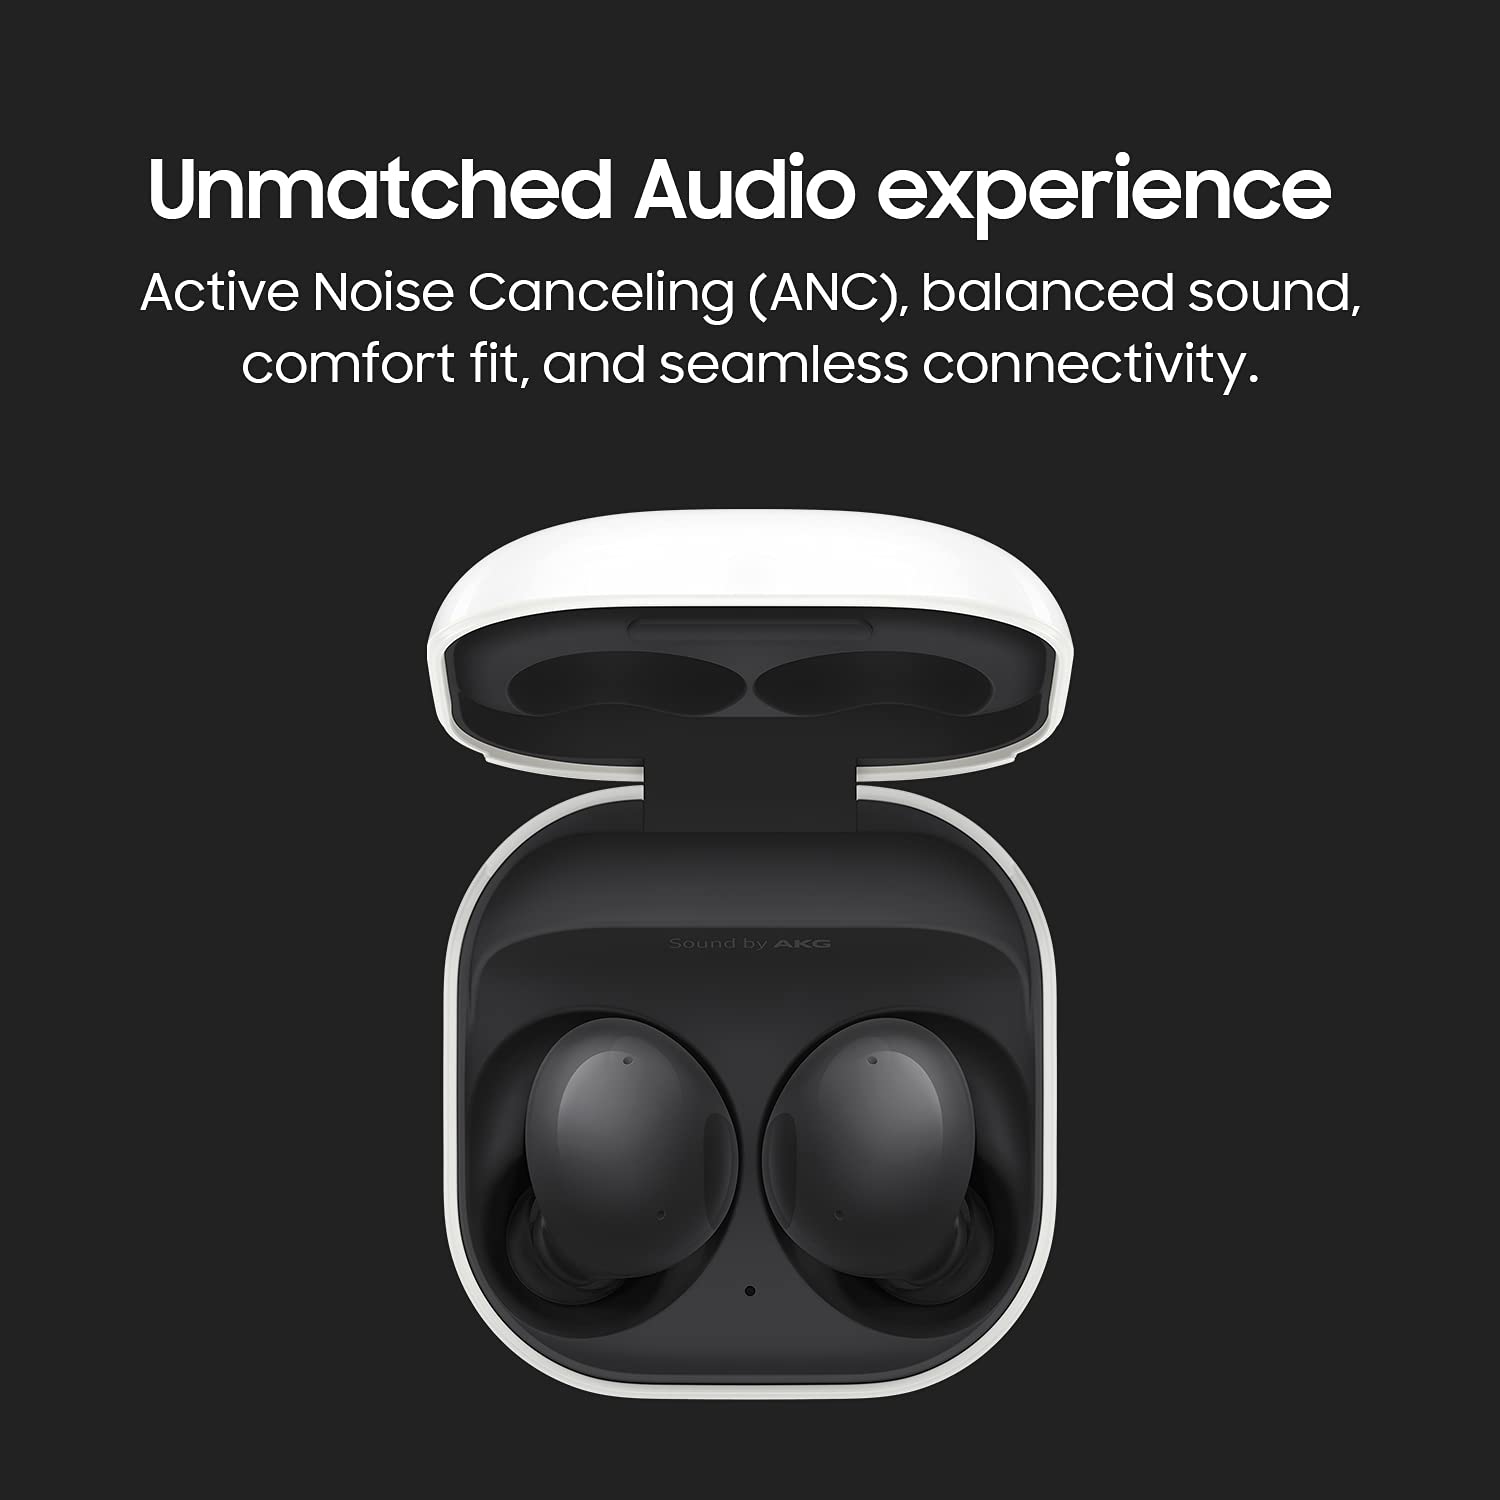 Samsung Galaxy Buds2  | Active Noise Cancellation, Auto Switch Feature, Up to 20hrs Battery Life, Graphite